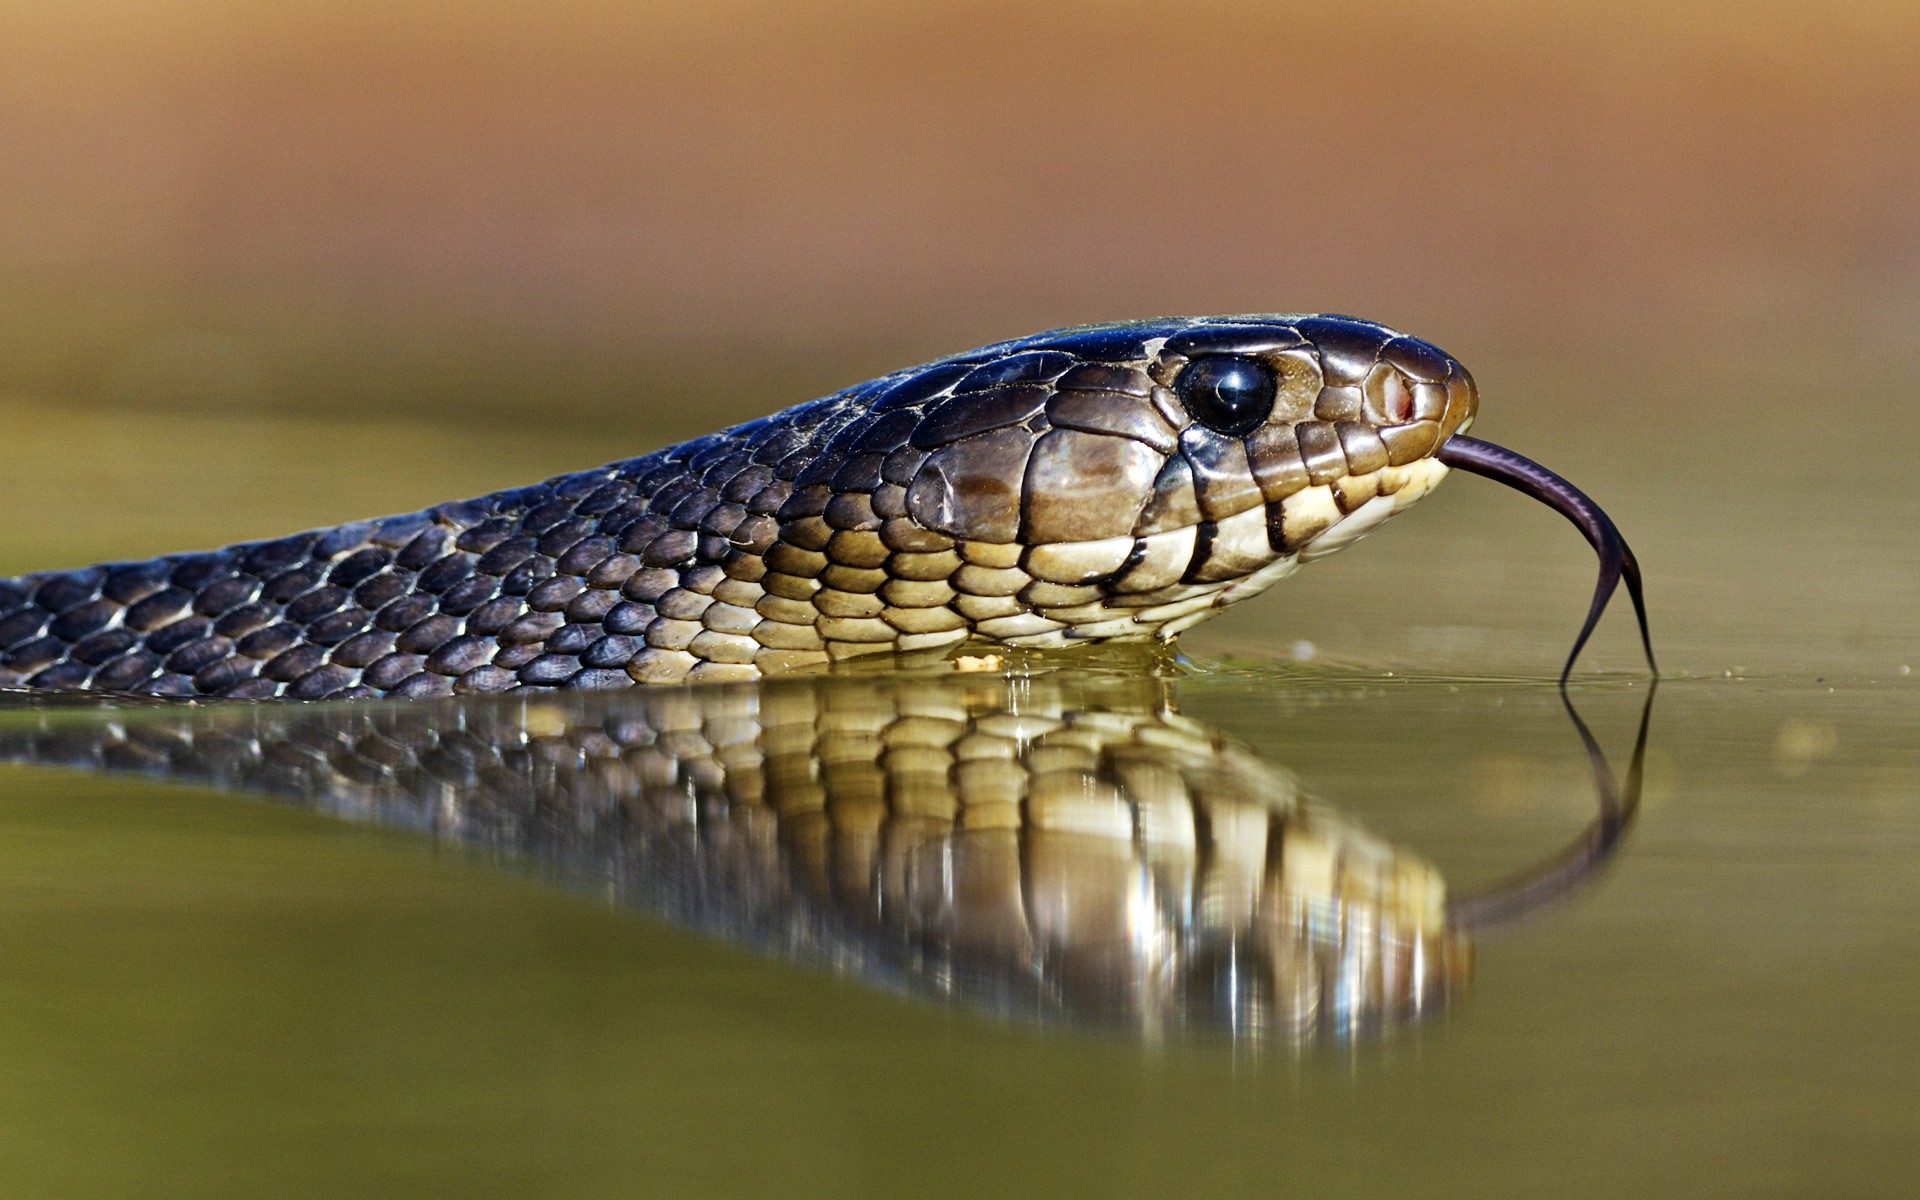 Hd Picture Of Water Snake - HD Wallpaper 